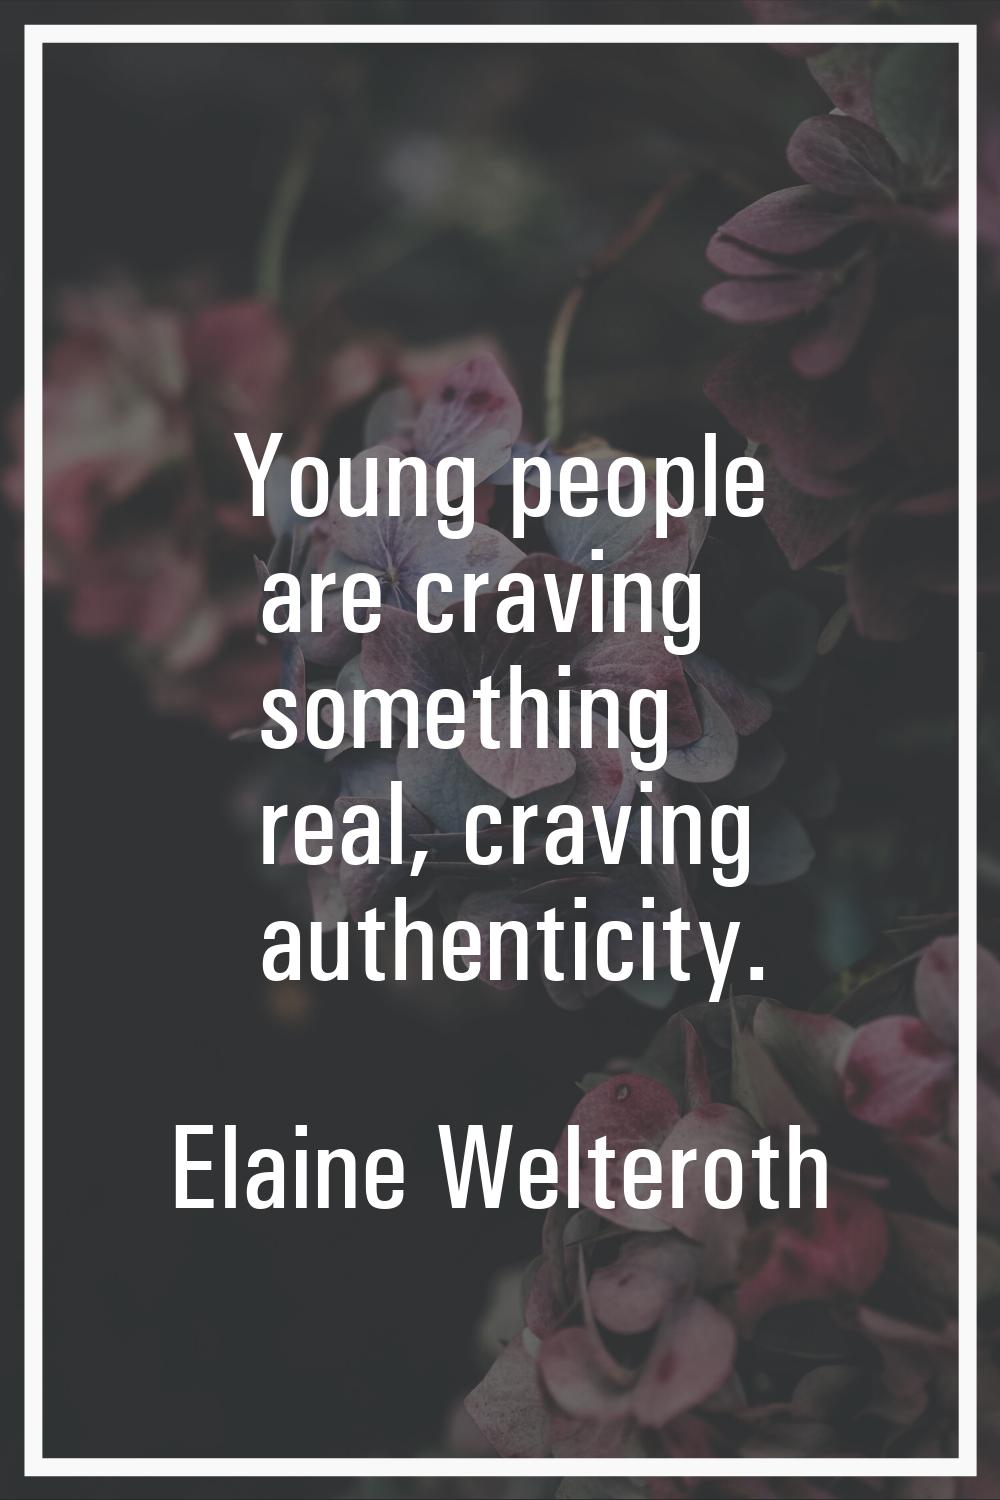 Young people are craving something real, craving authenticity.